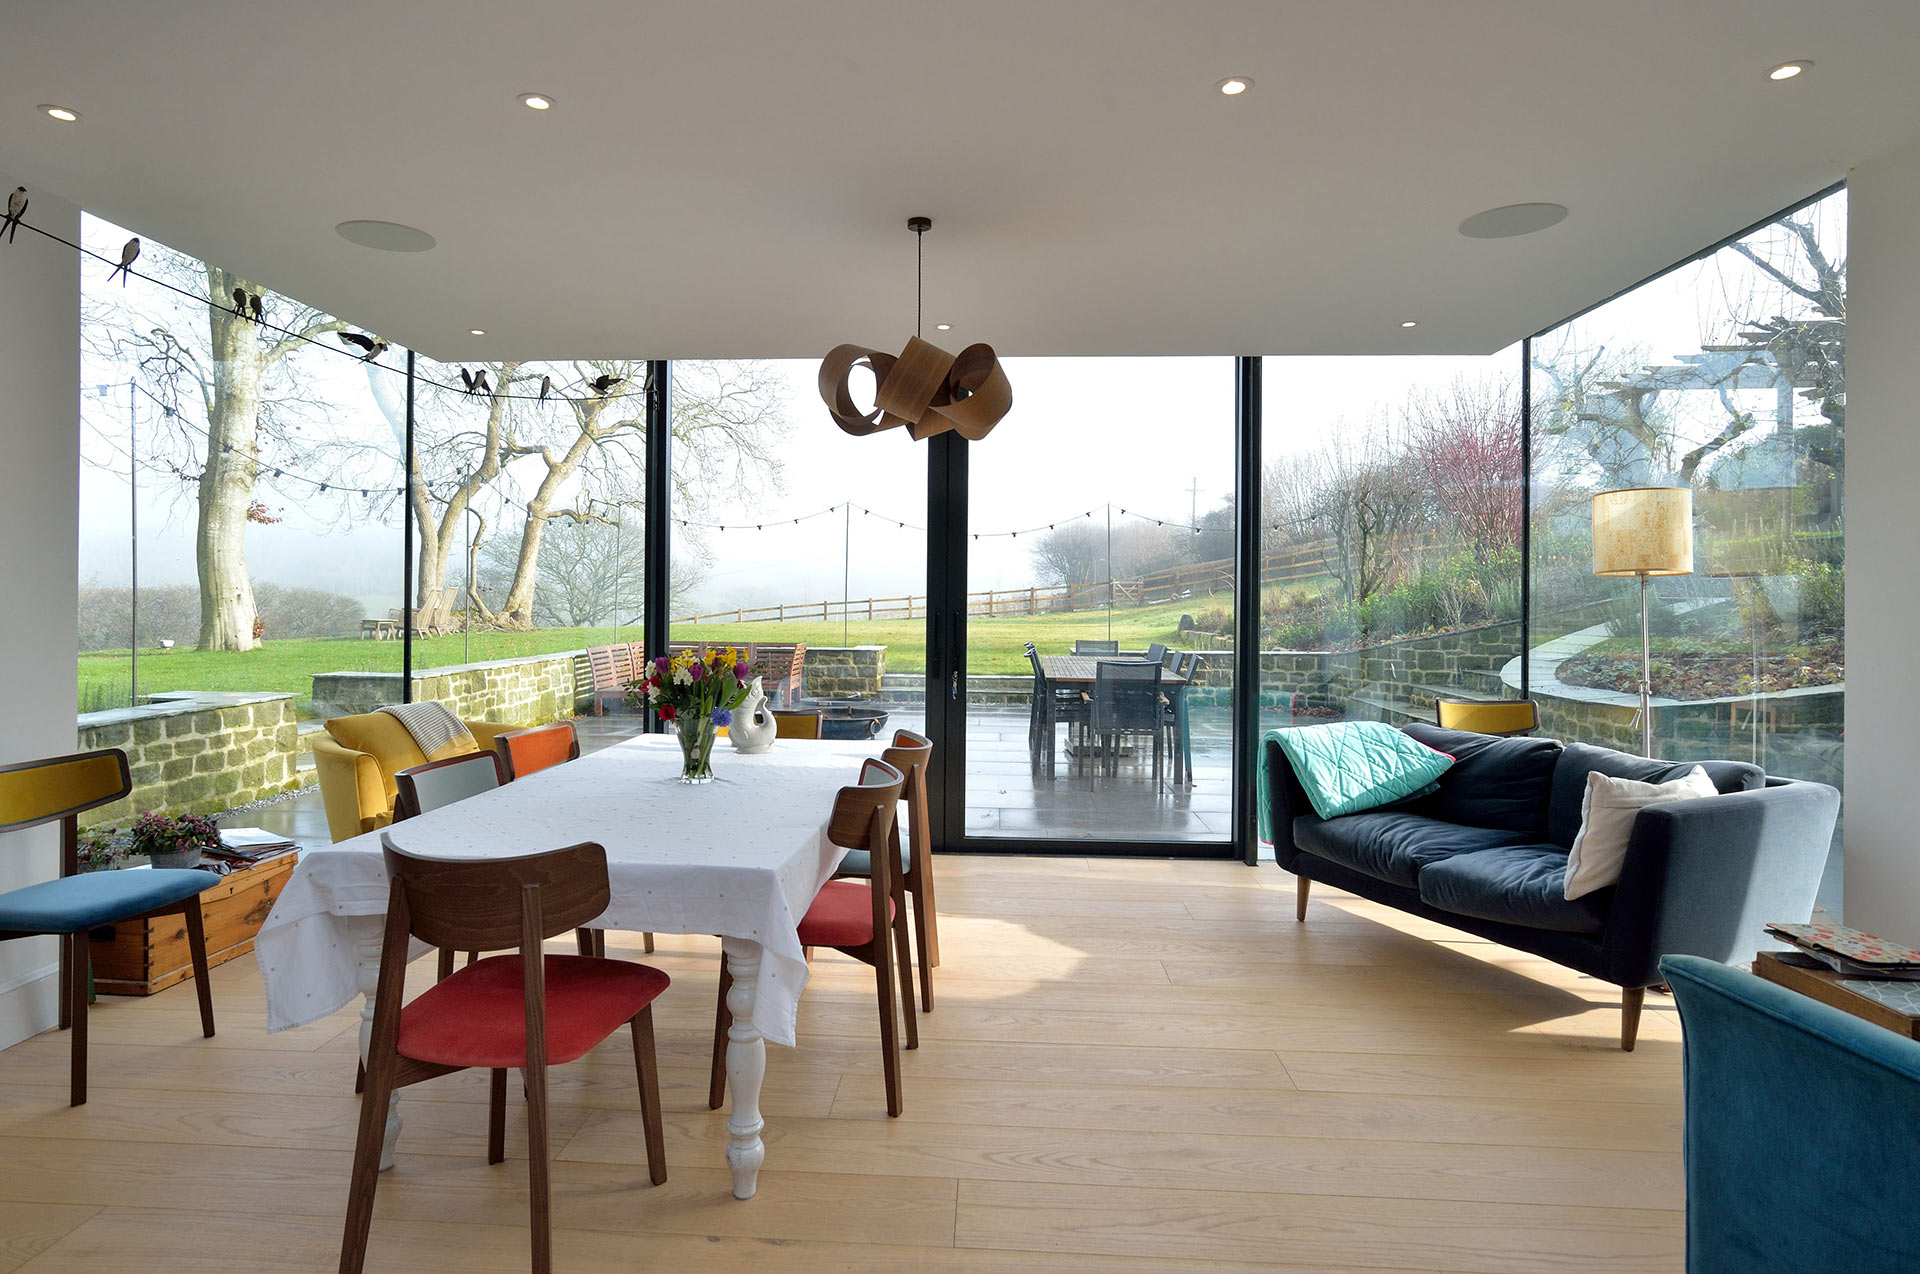 interior of dining room extension looking out to terrace patio